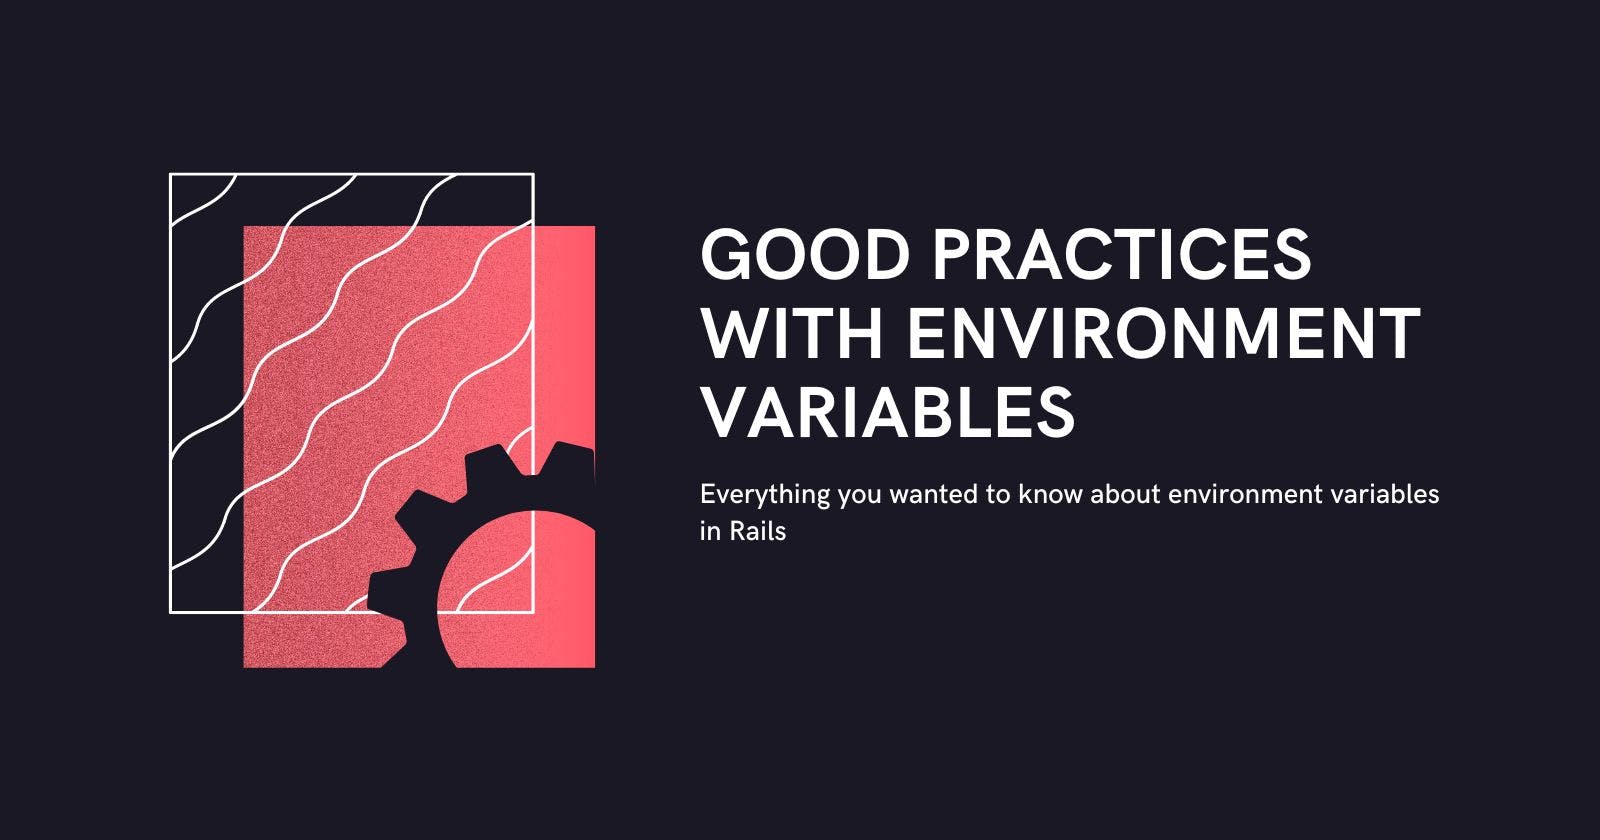 Everything you wanted to know about environment variables in Rails